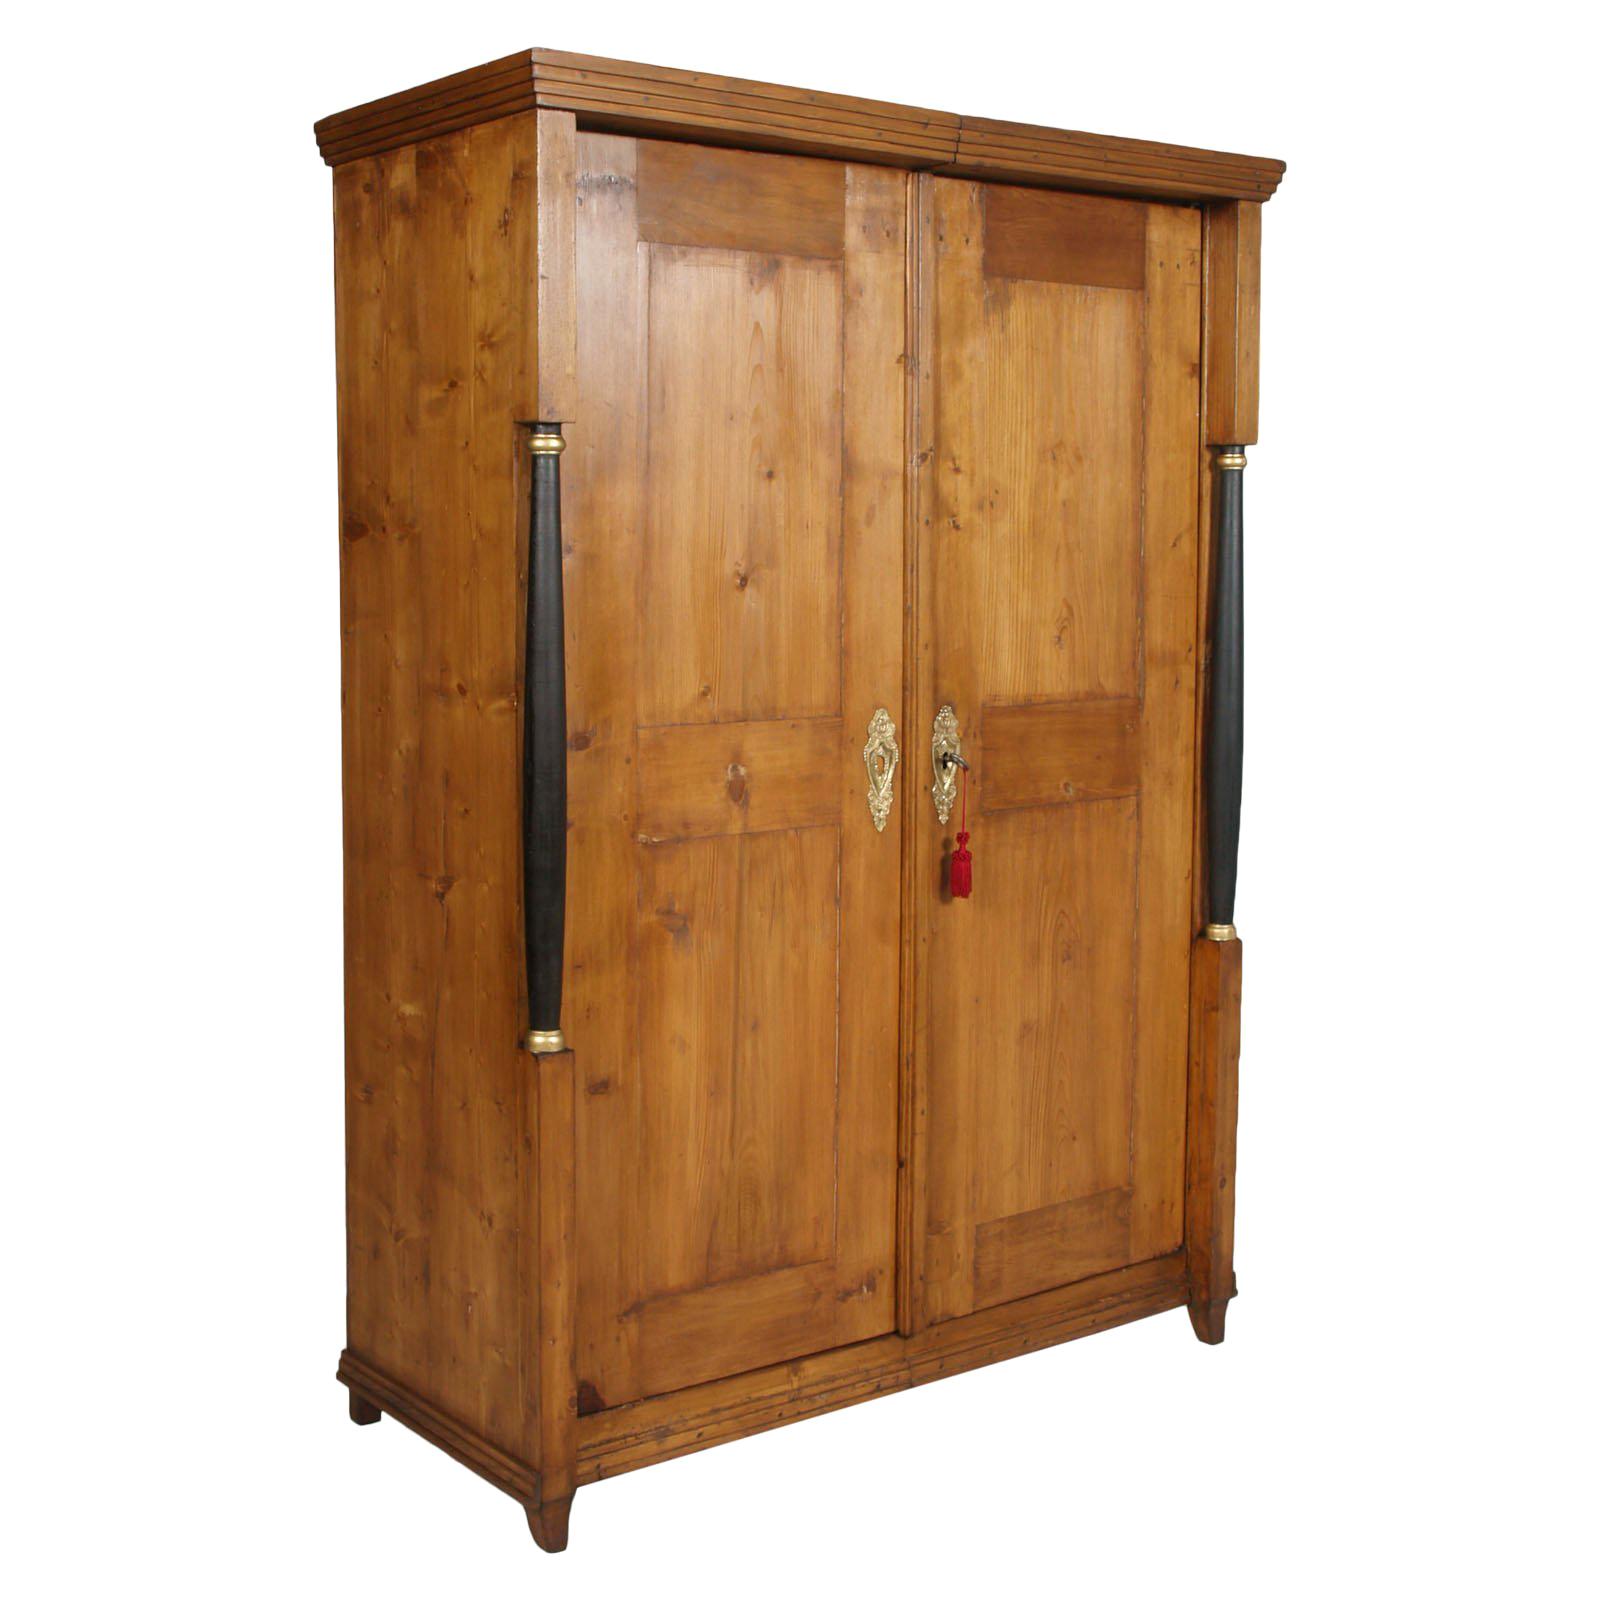 Austrian 18th Century Empire Style Two Doors Larch Wood Armoire Wardrobe Cabinet For Sale